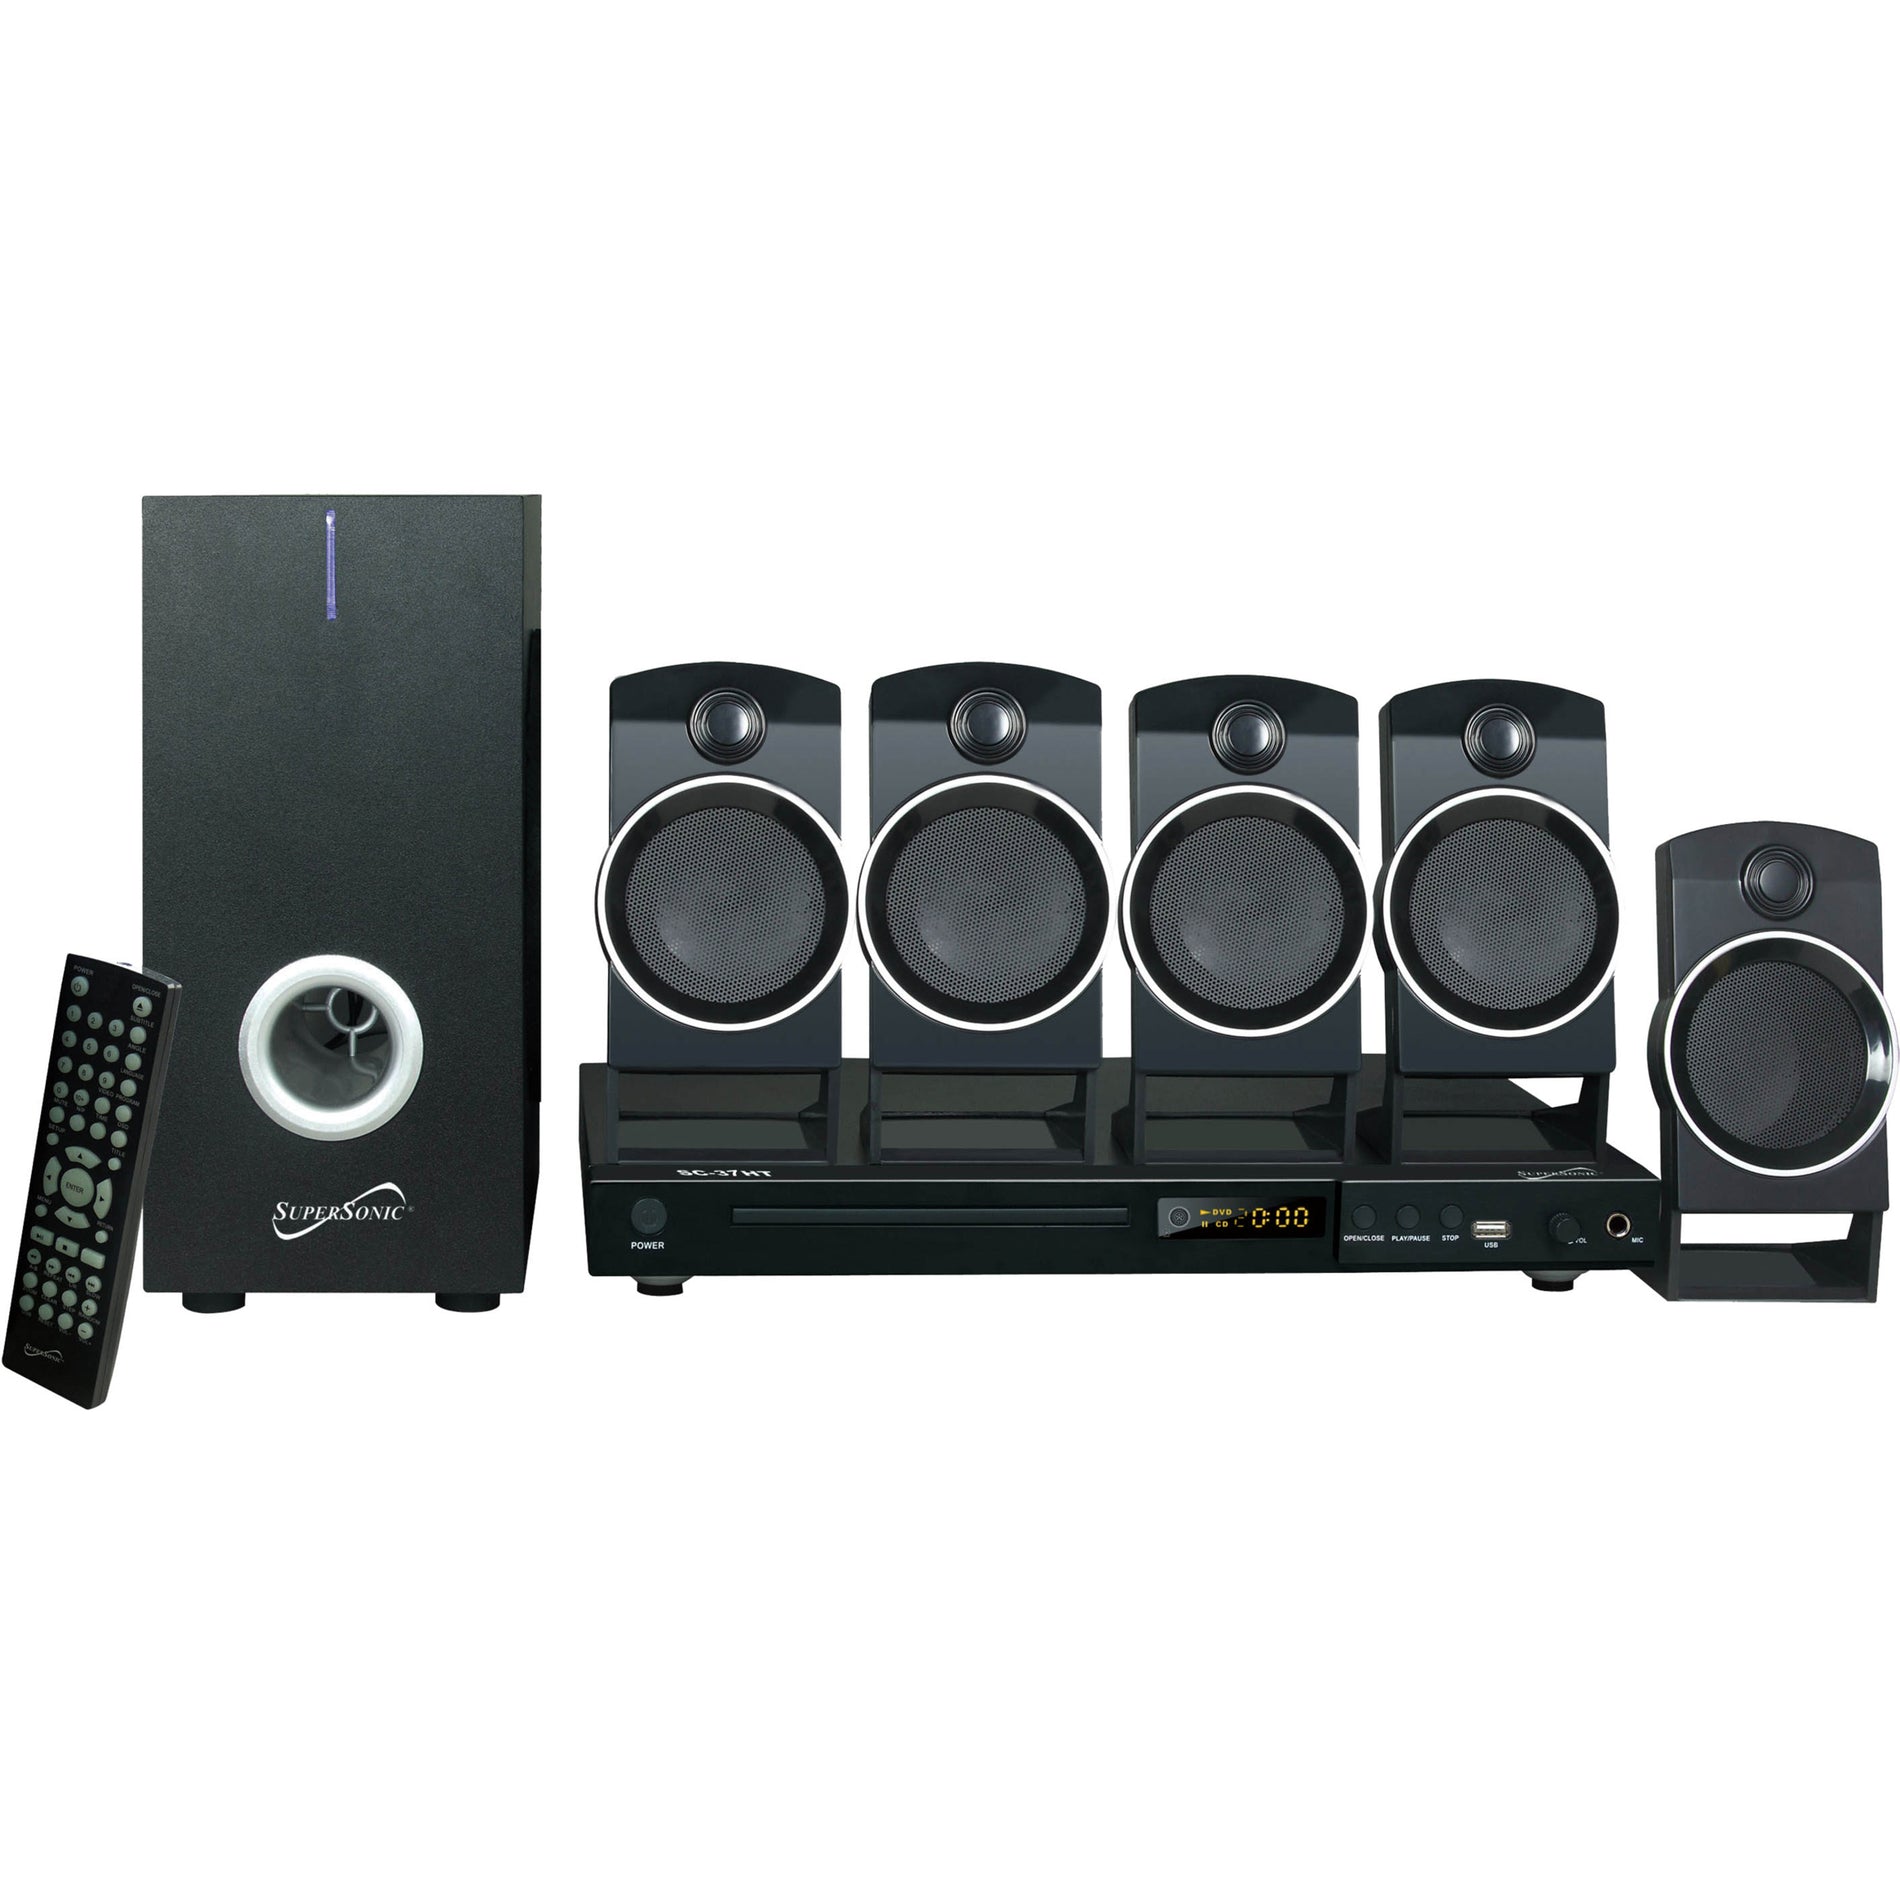 Supersonic SC-37HT 5.1 Channel DVD Home Theater System with USB Input & Karaoke Function, 25W RMS Output Power, SVCD, VCD, DVD Video Formats